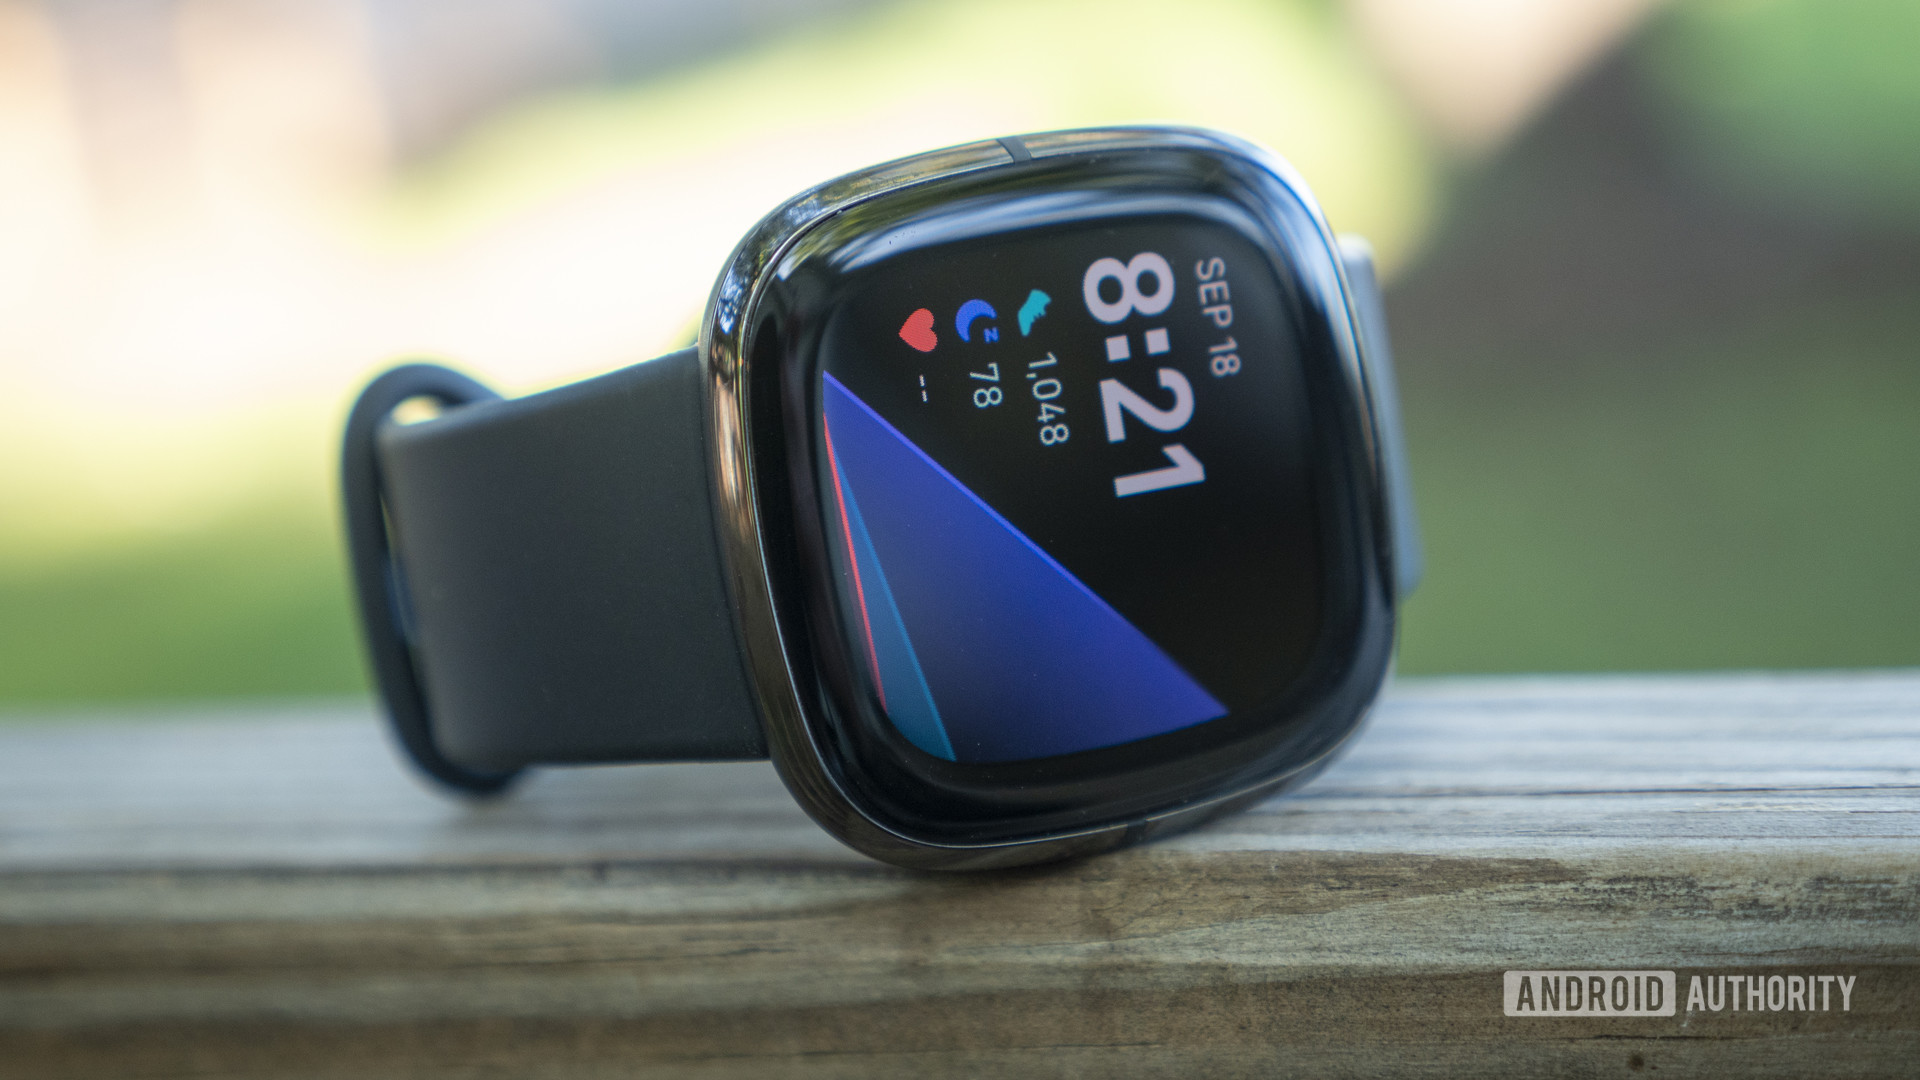 A Fitbit Sense rests on a wooden surface outdoors, displaying watch face 5.